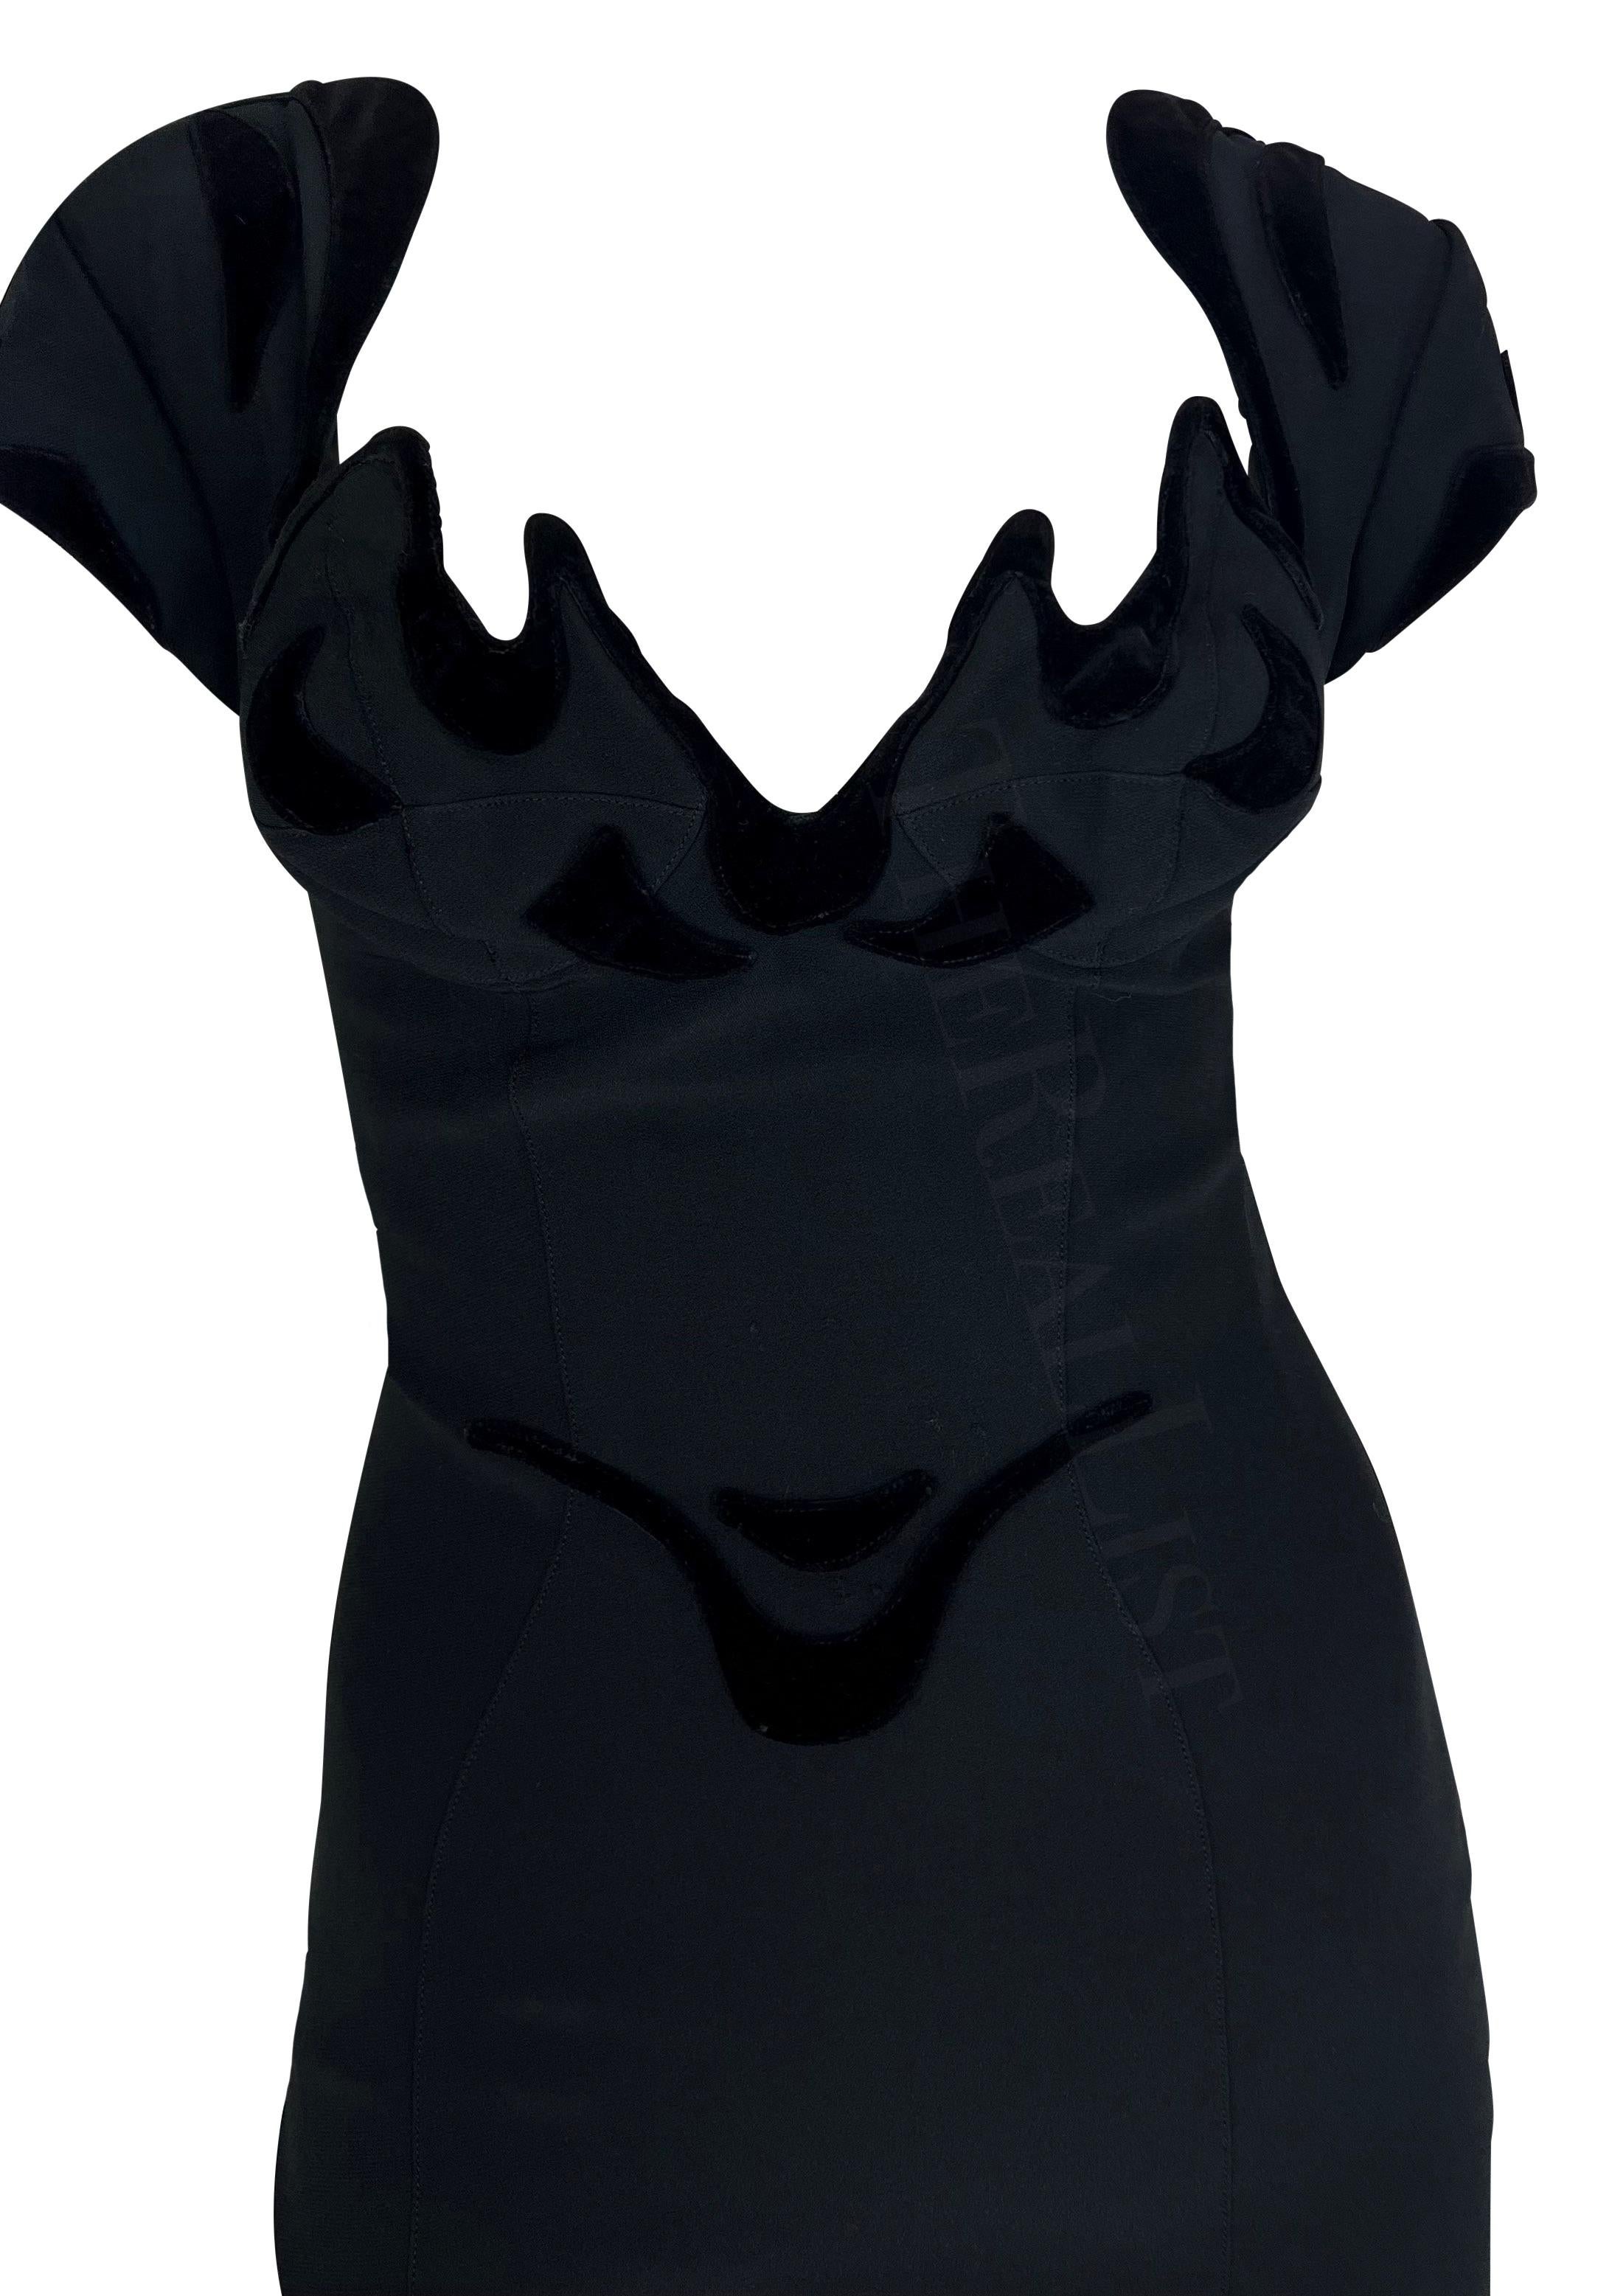 TheRealList presents: a beautiful black Thierry Mugler dress, designed by Manfred Mugler. From the 1990s, this ultra sexy dress features an abstract neckline and petal sleeves. The dress is made complete with black velvet accents that outline the